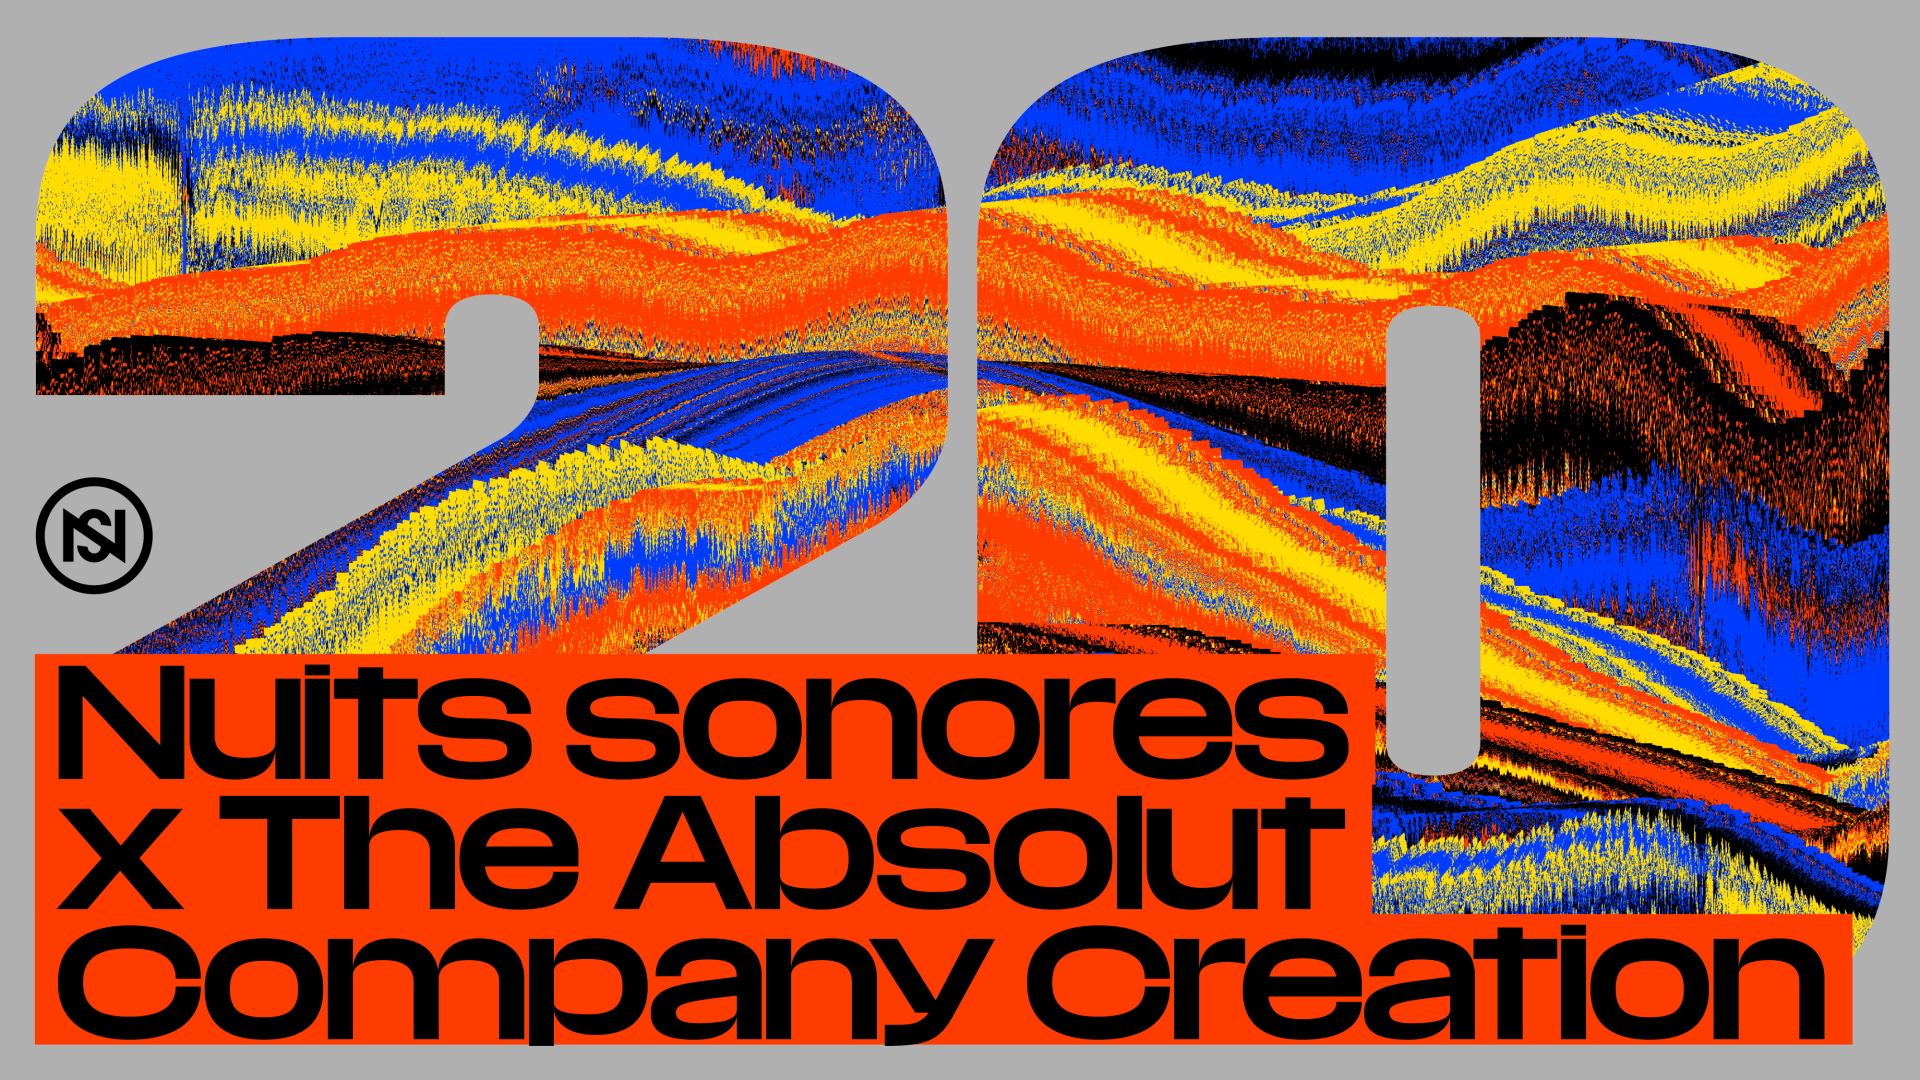 Nuits sonores x The Absolut Company Creation